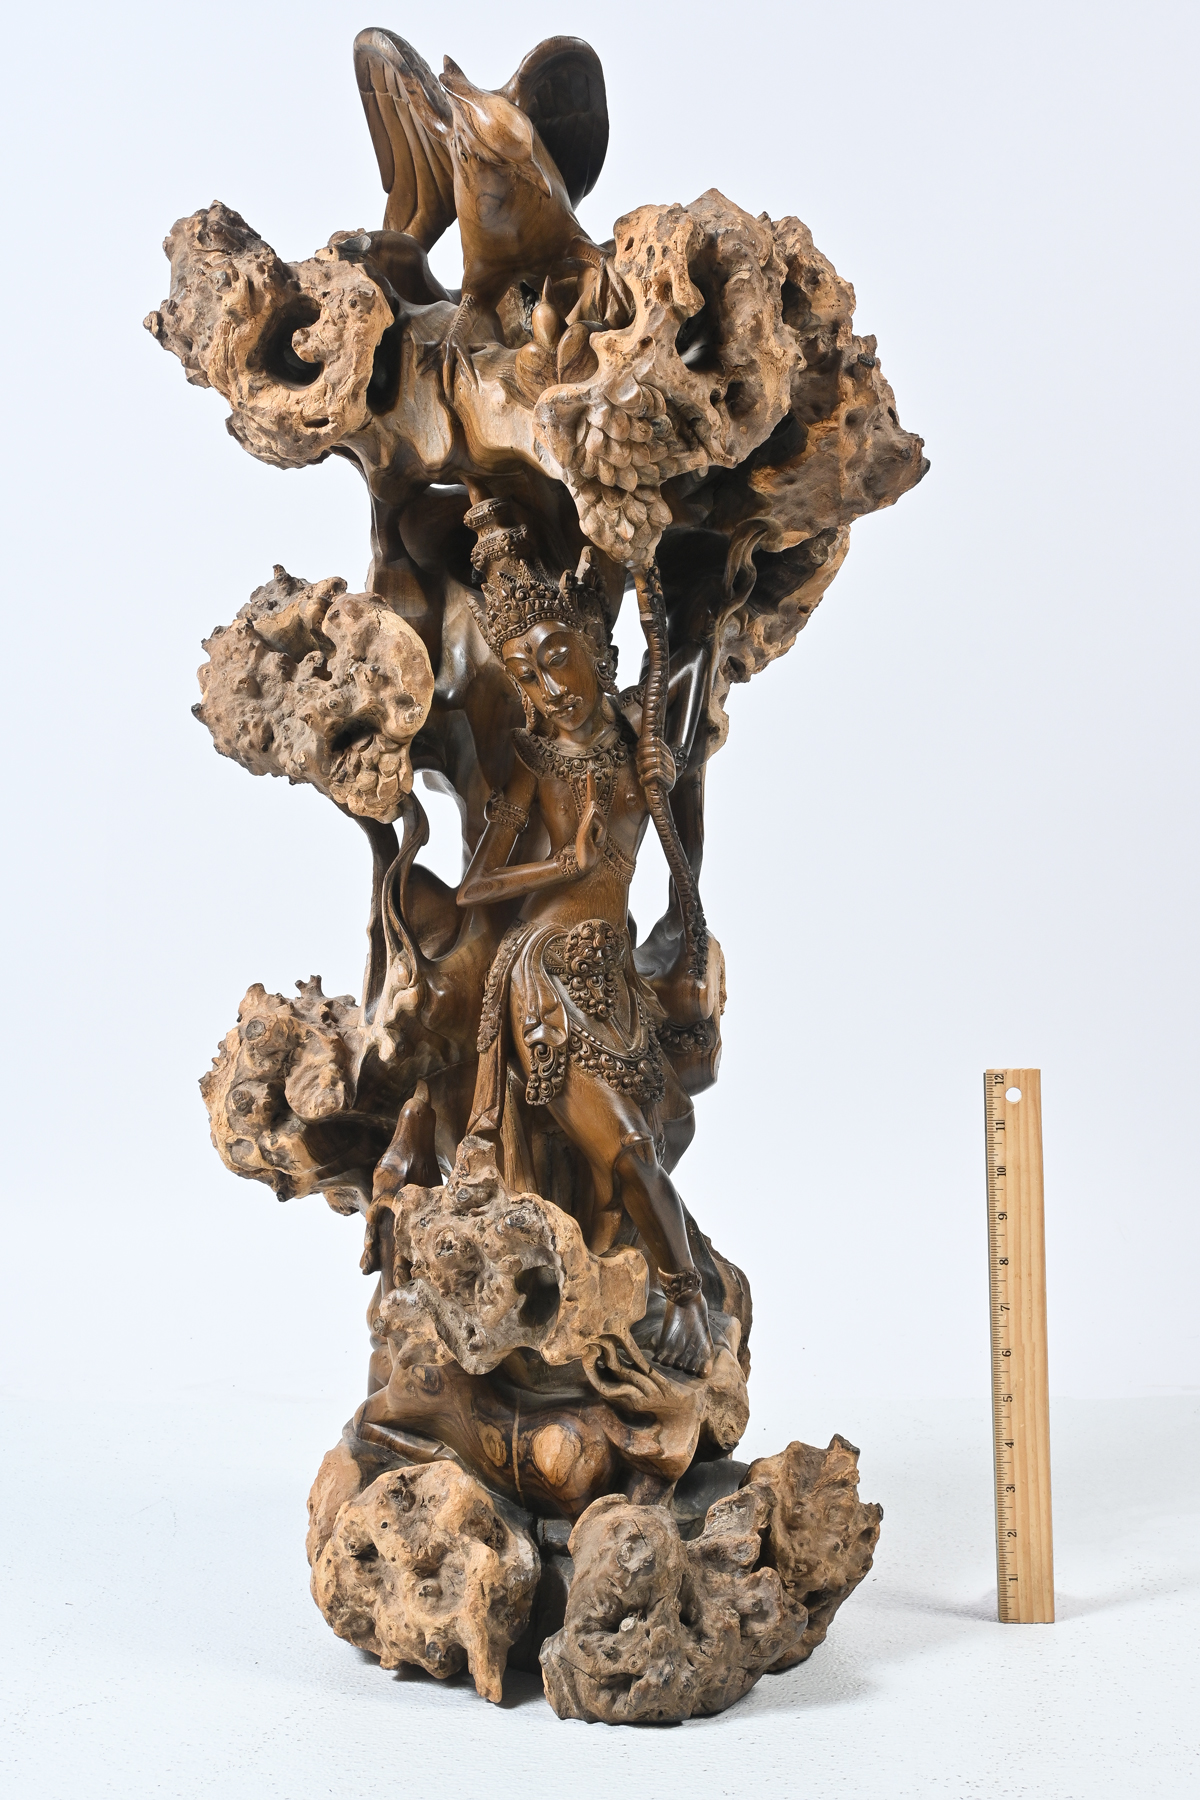 INTRICATELY CARVED THAI TREE ROOT SCULPTURE: